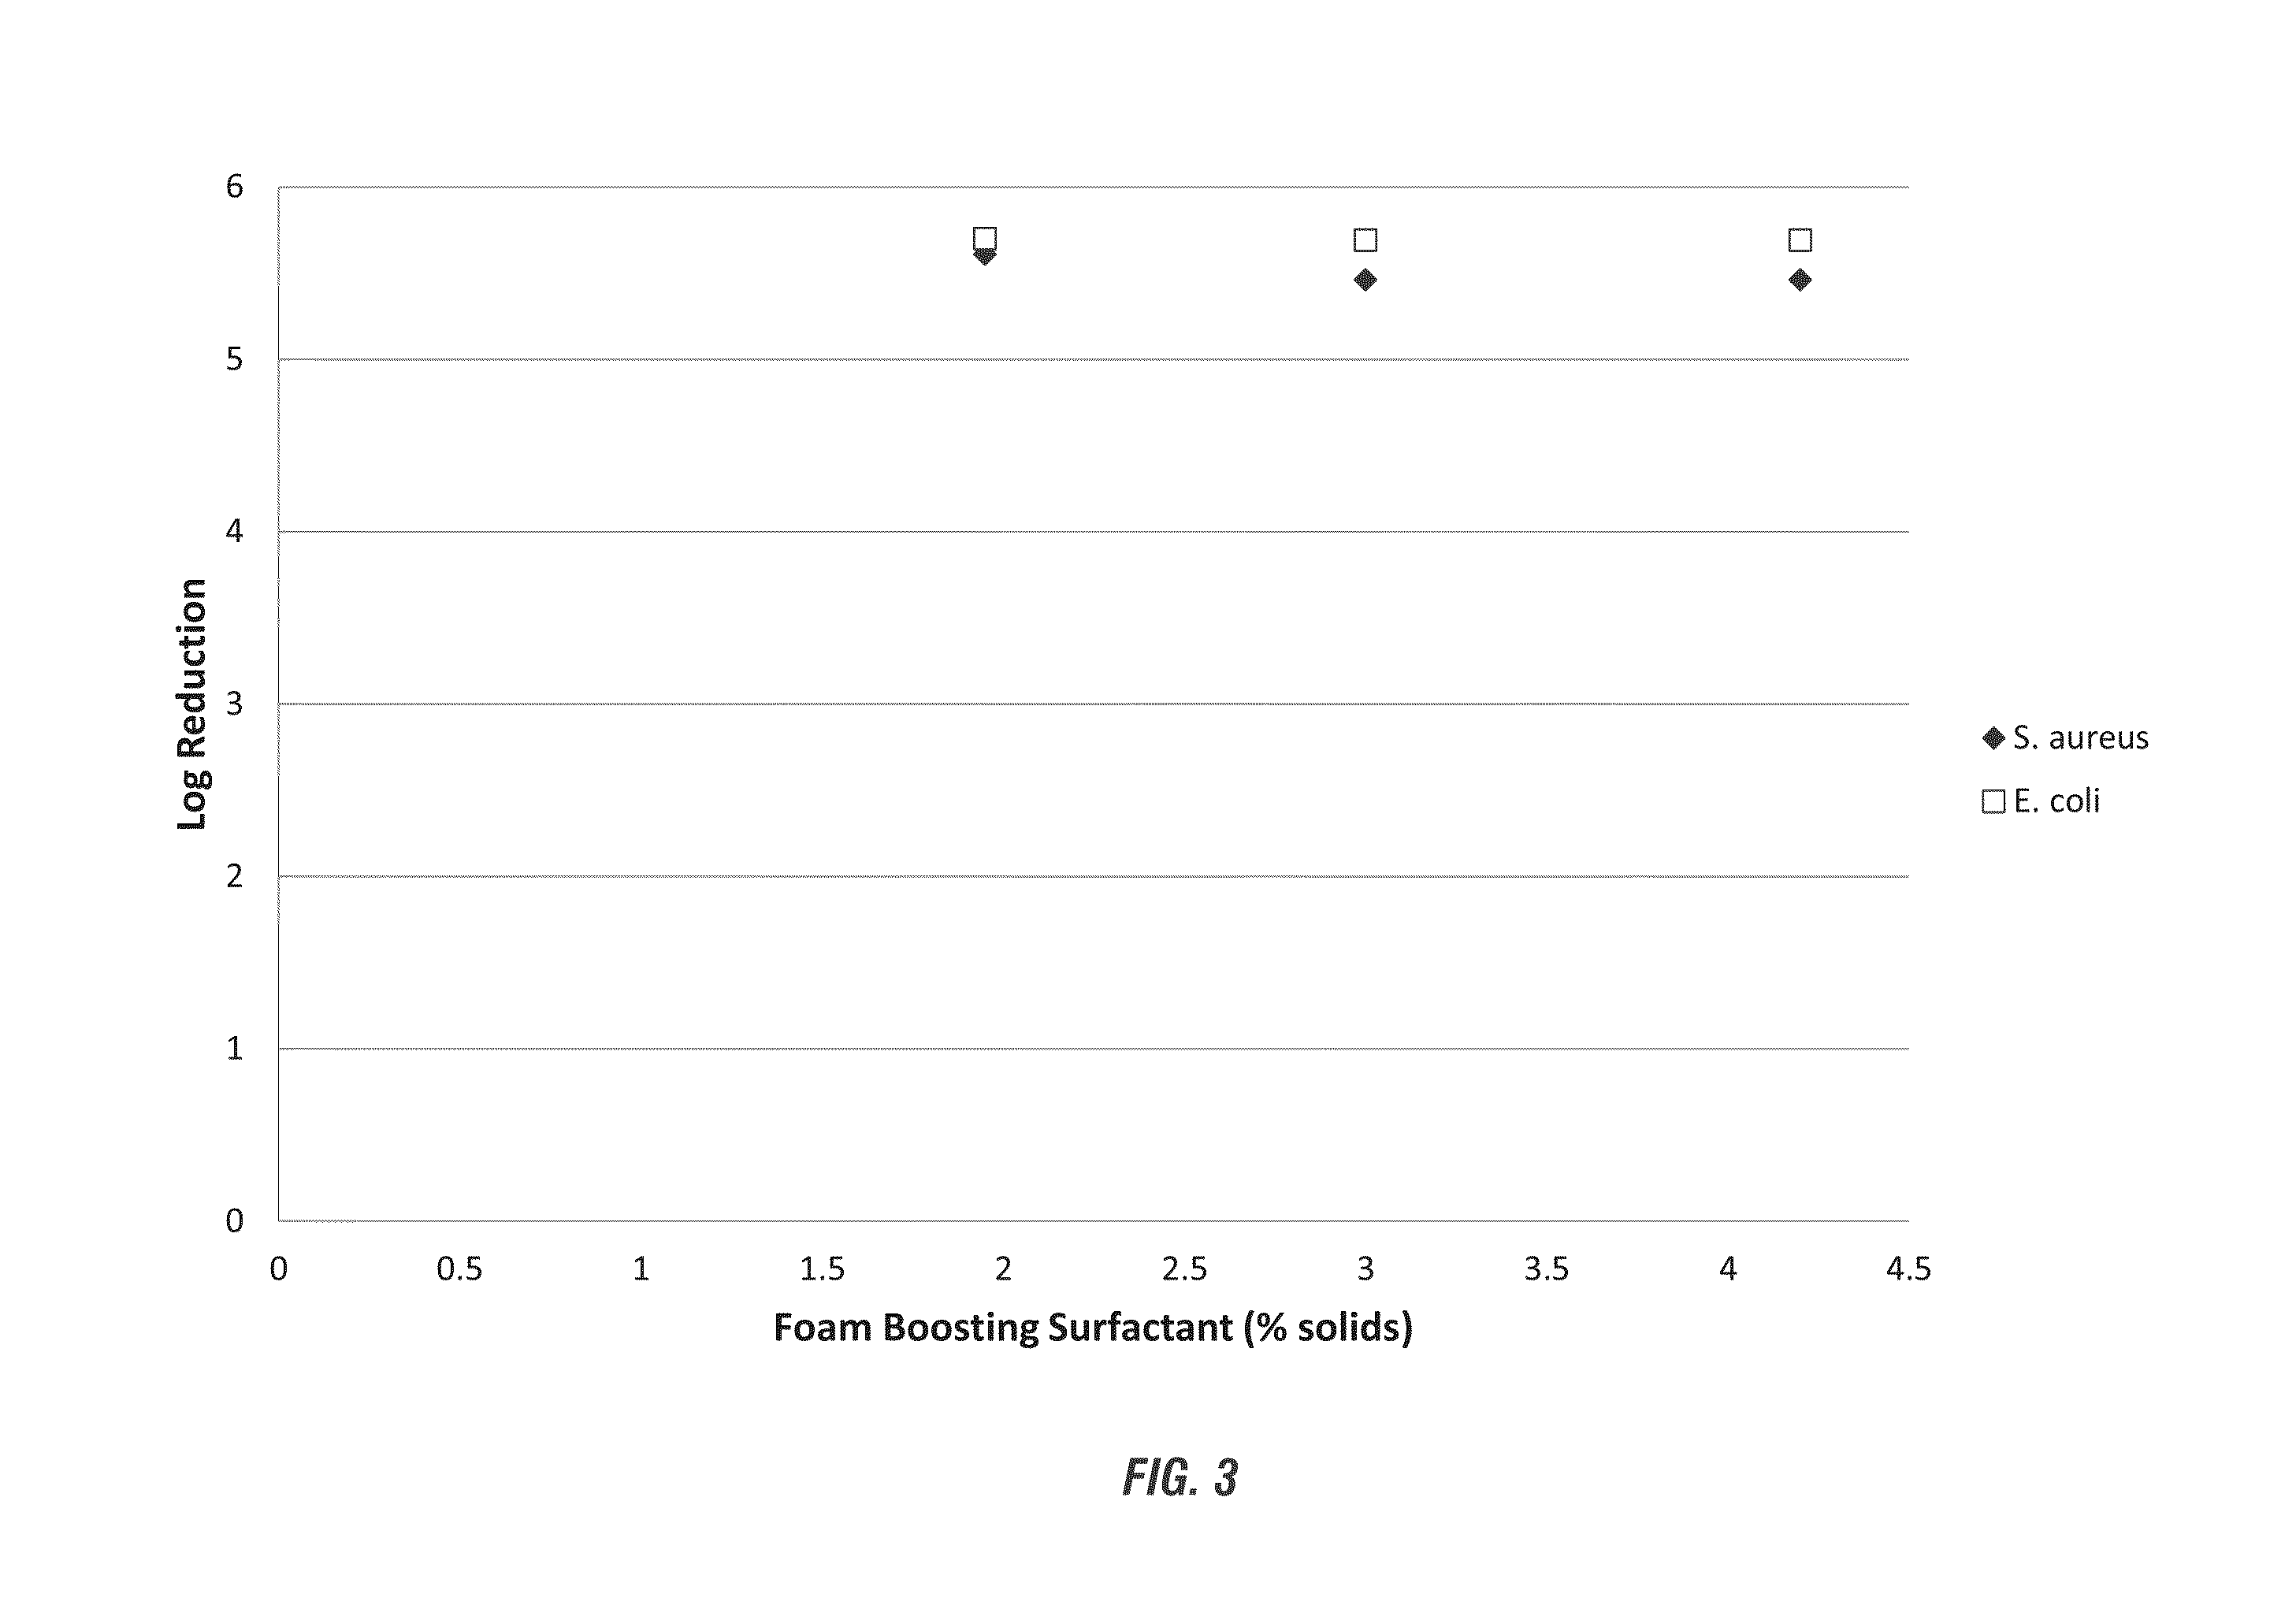 Antimicrobial compositions containing cationic active ingredients